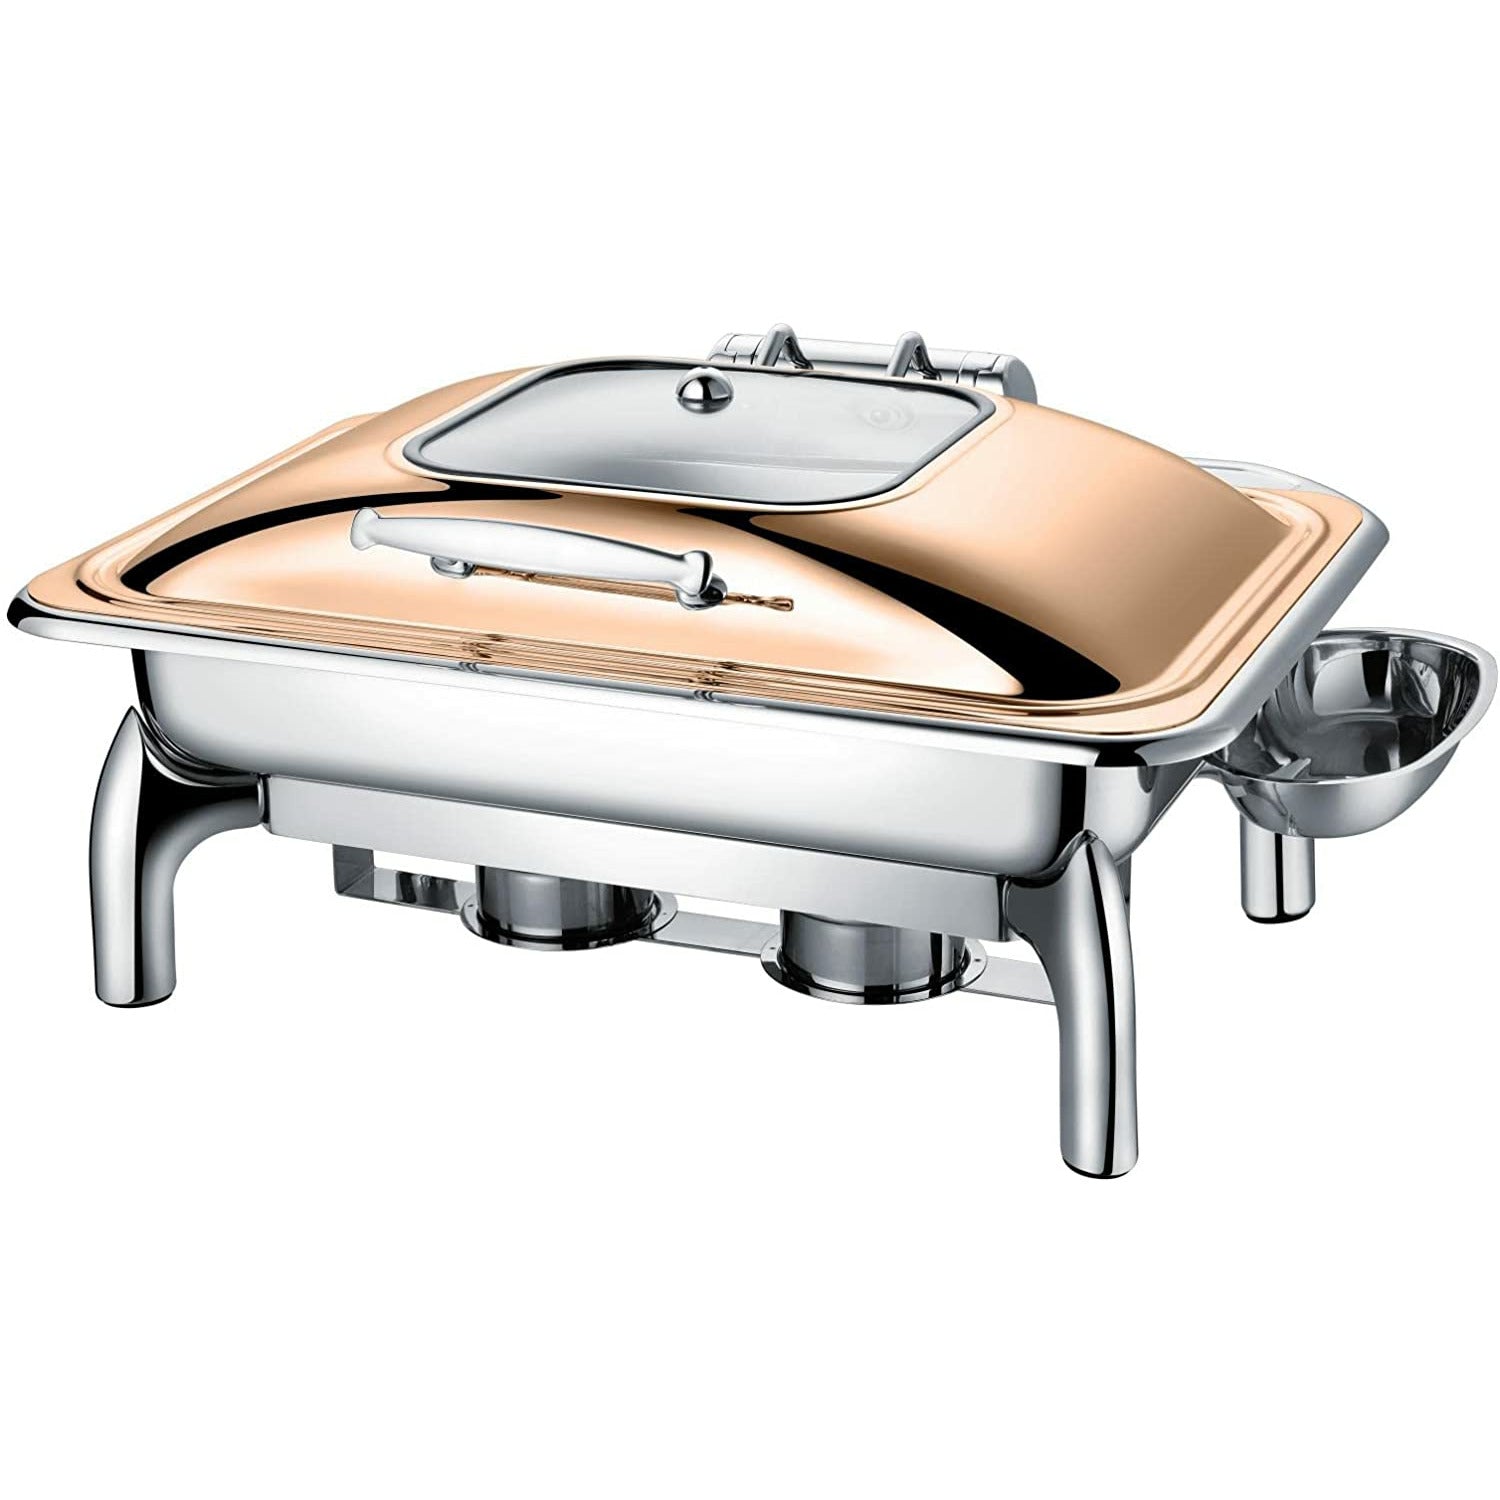 Elegant Chafer Dish with Rose Gold Accents - Full Size 6 Quart